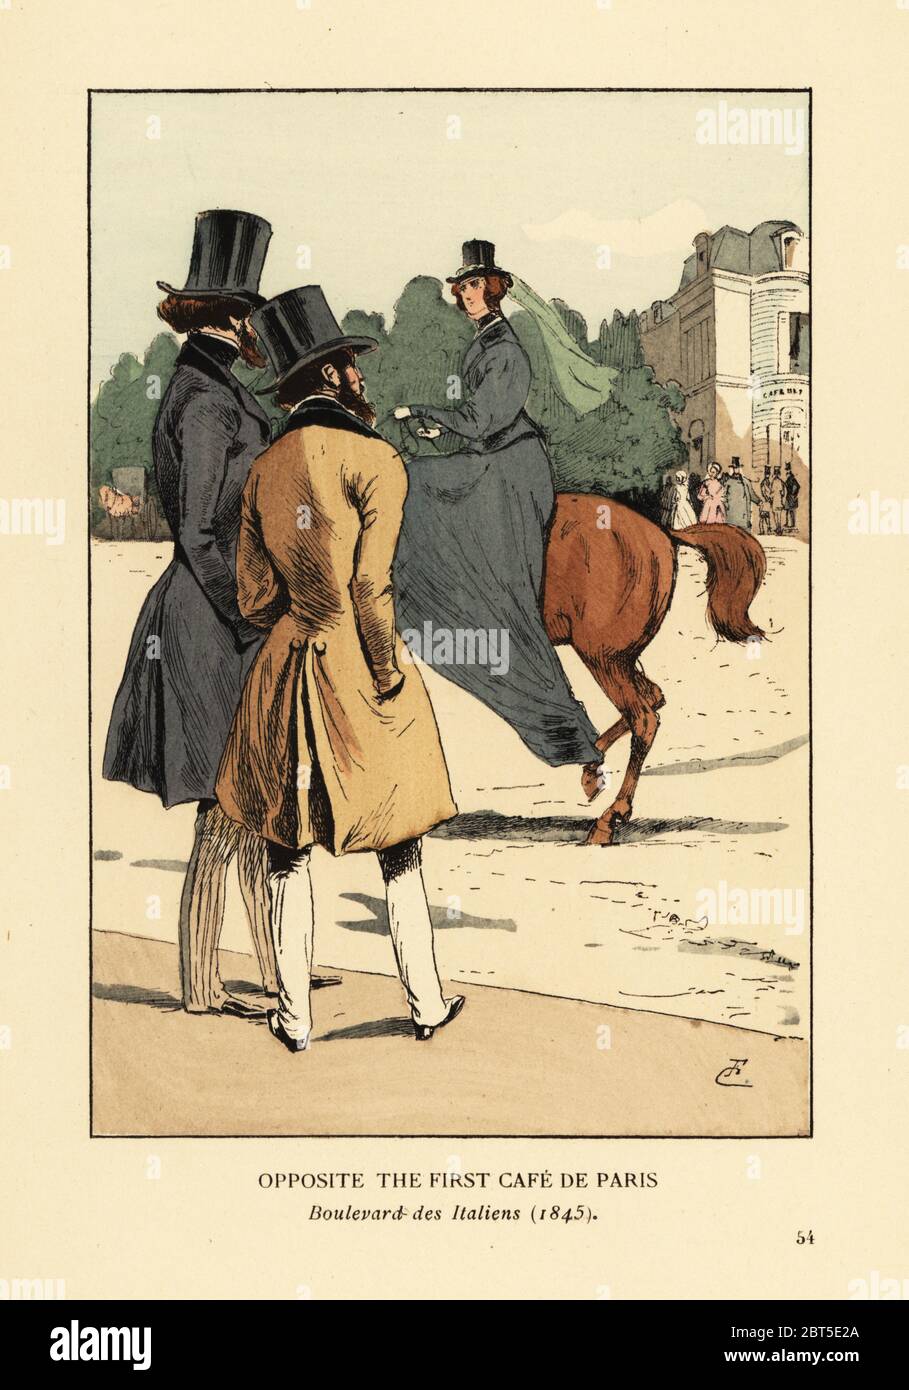 Opposite the first Cafe de Paris, Boulevard des Italiens, 1845. Two bearded dandies in redingotes and top hats watch a woman in long riding dress side-saddle on a horse. The cafe was one of several popular restaurants on the boulevard. Handcoloured lithograph by R.V. after an illustration by Francois Courboin from Octave Uzannes Fashion in Paris, William Heinemann, London, 1898. Stock Photo